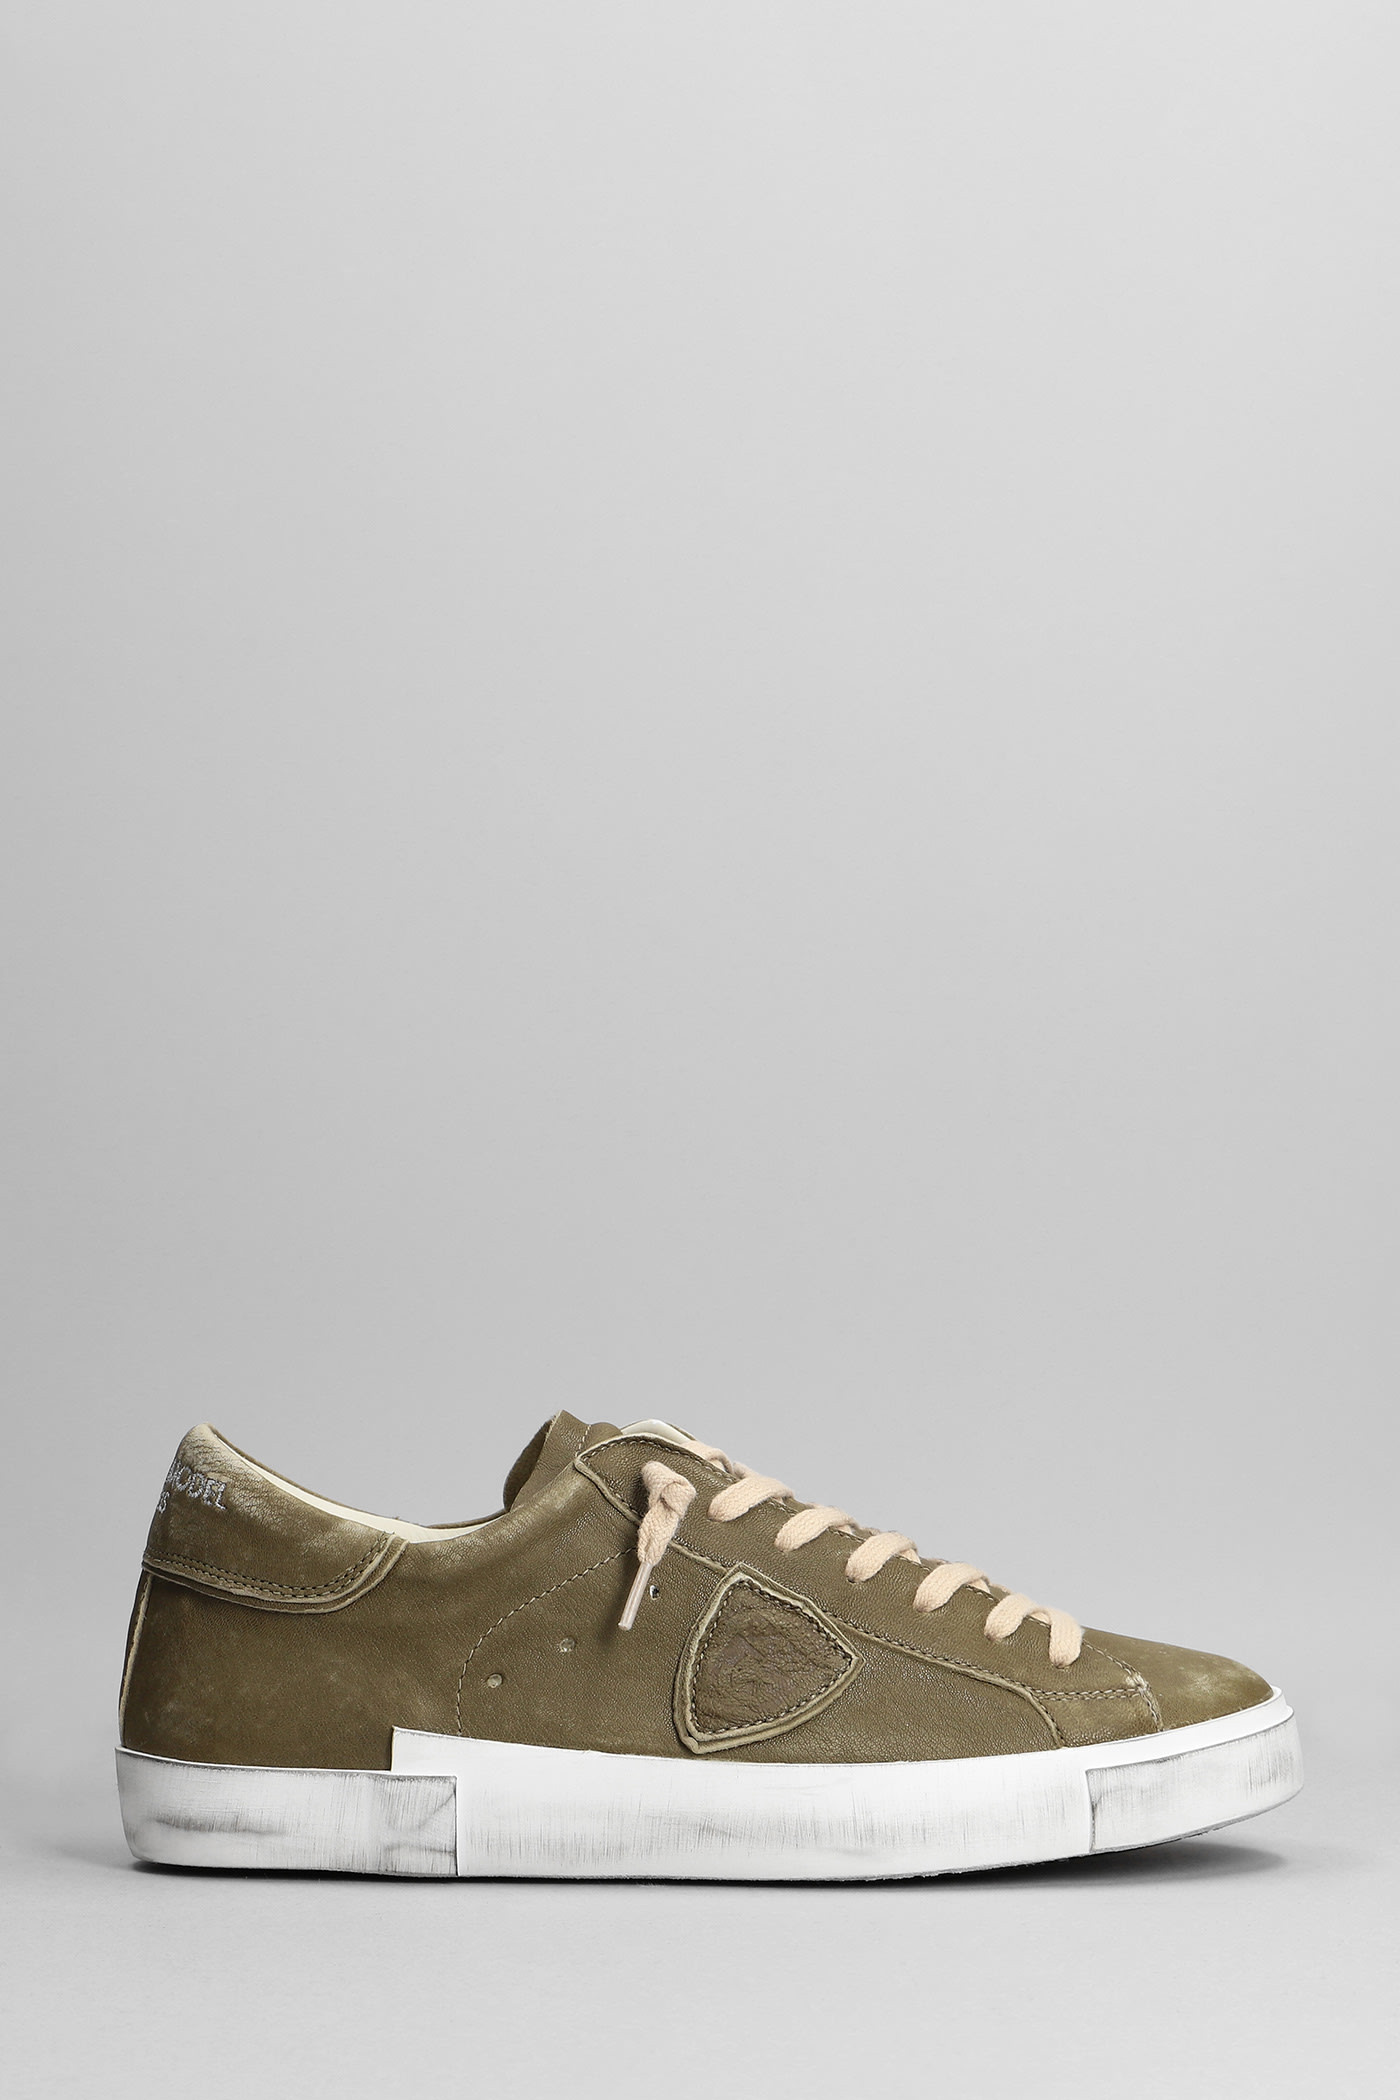 Philippe Model Prsx Sneakers In Green Suede